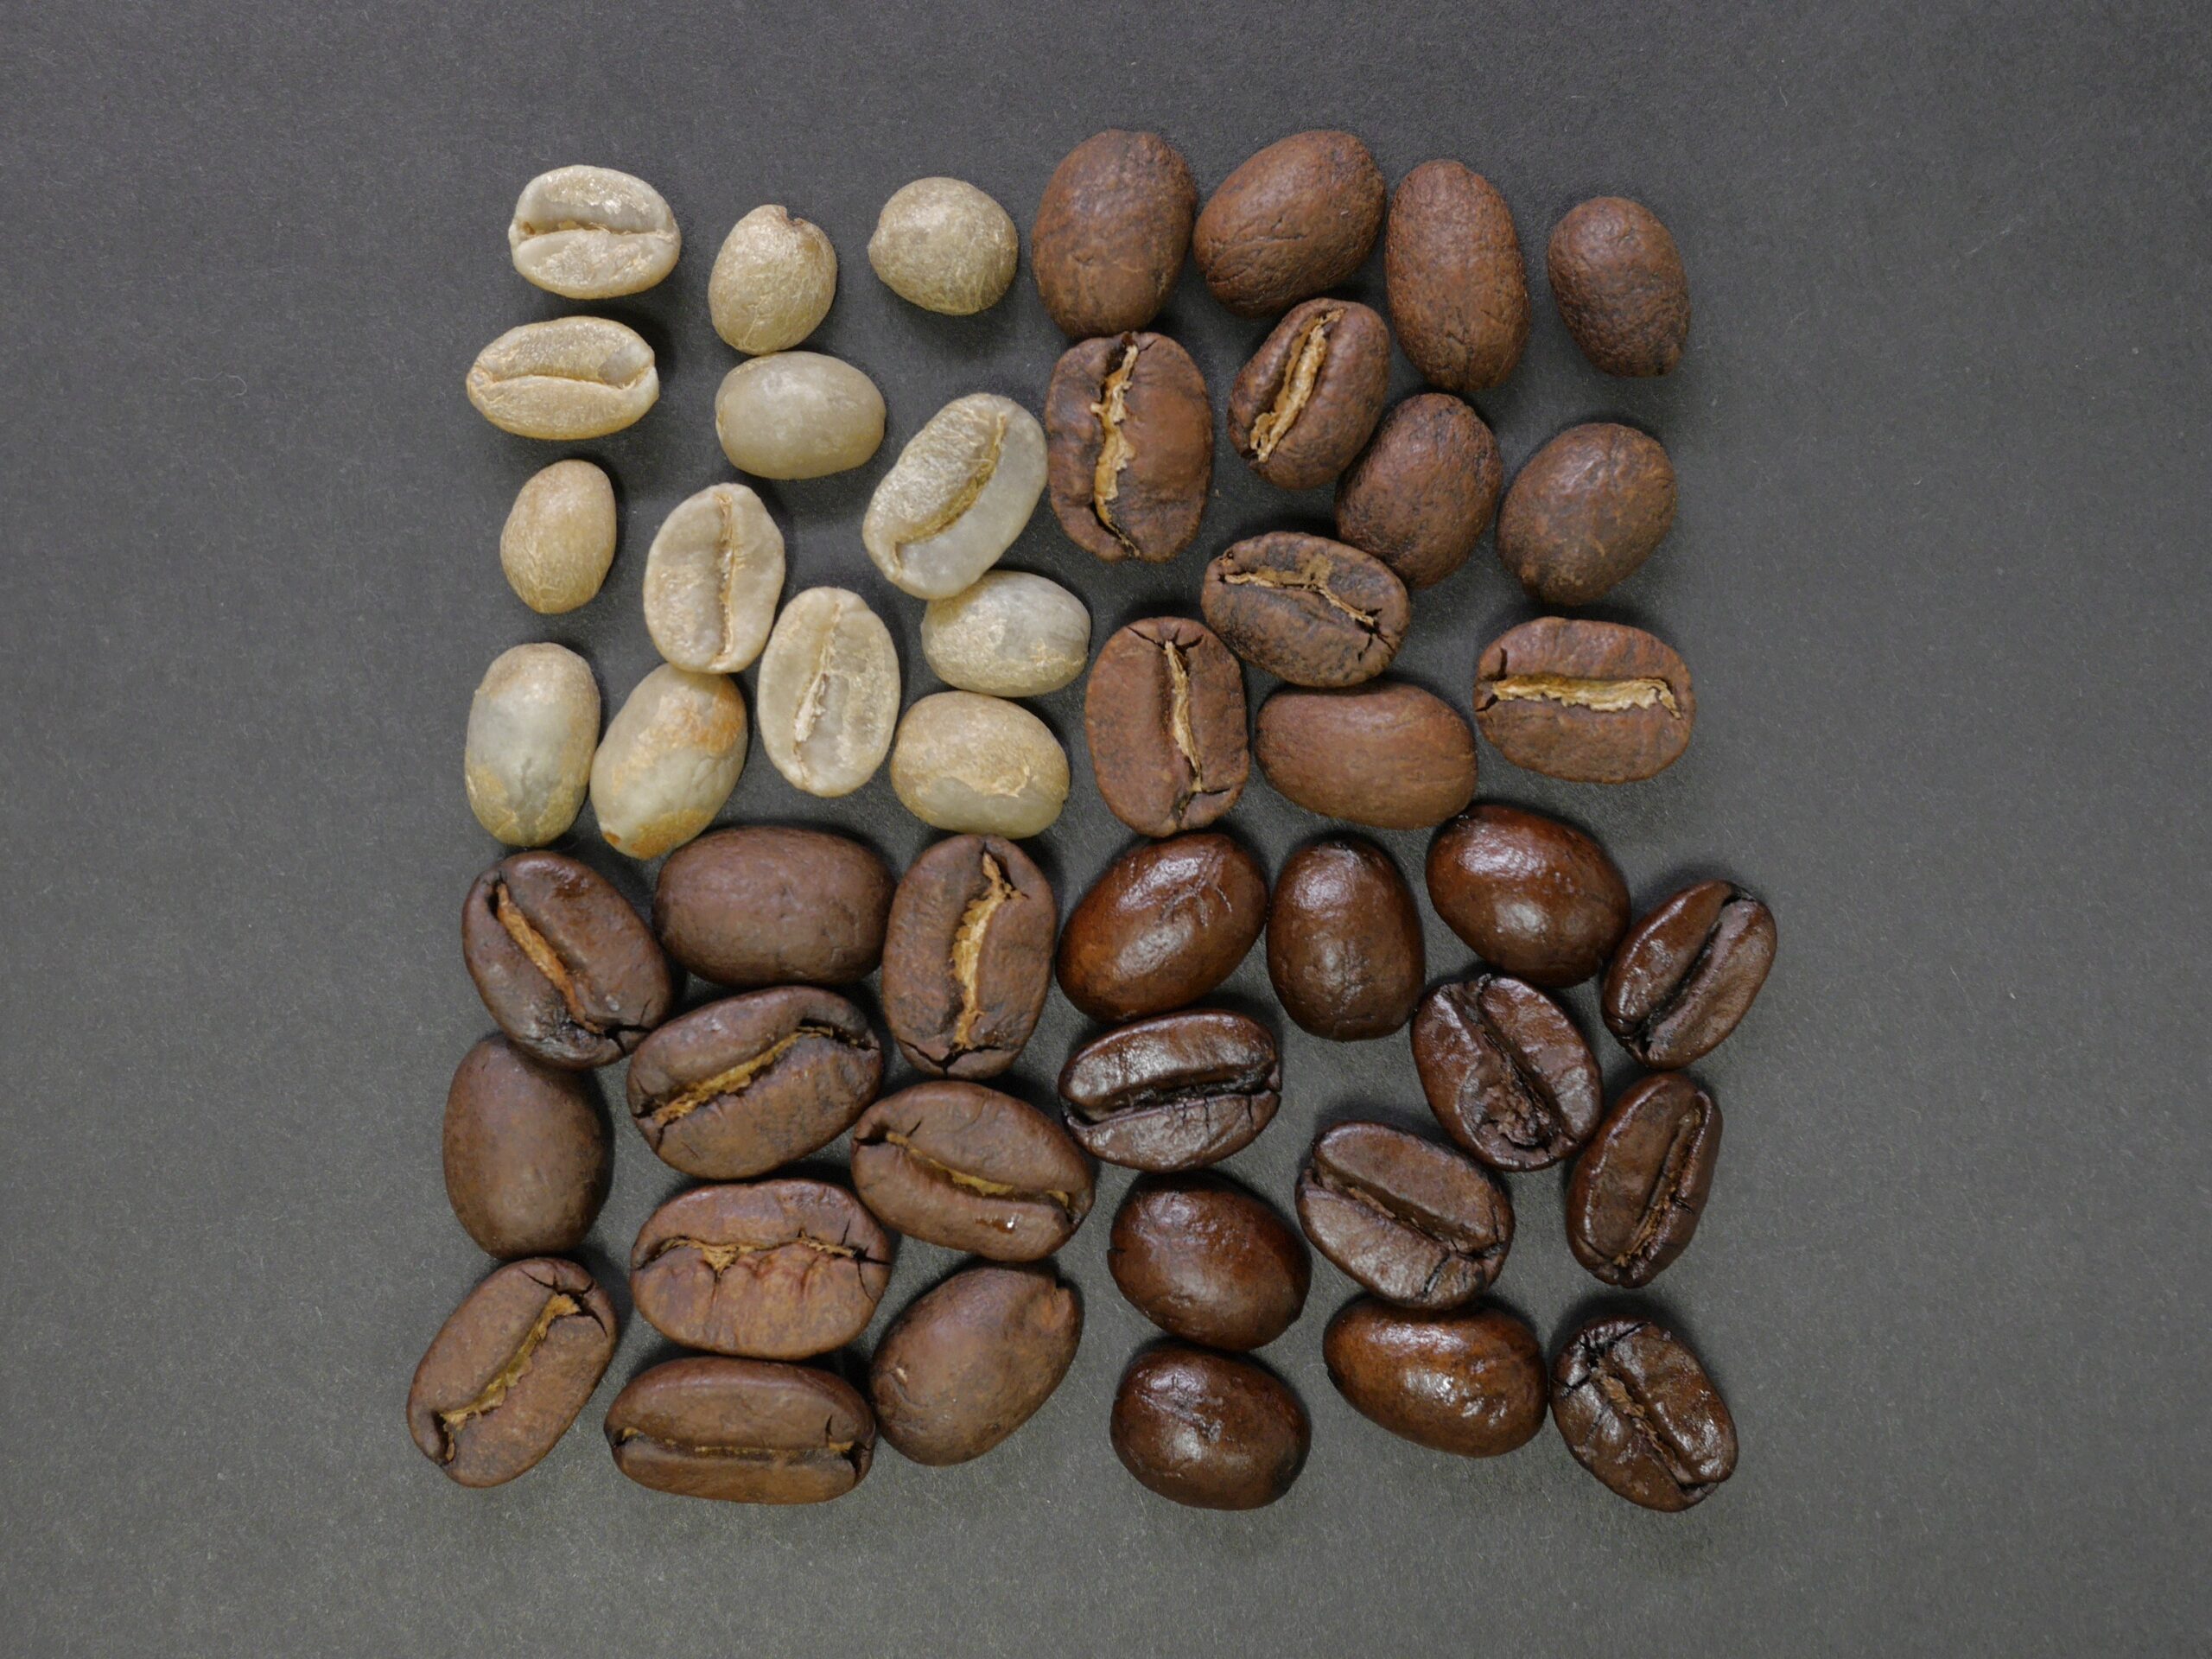 Coffee Bean Types and Their Characteristics